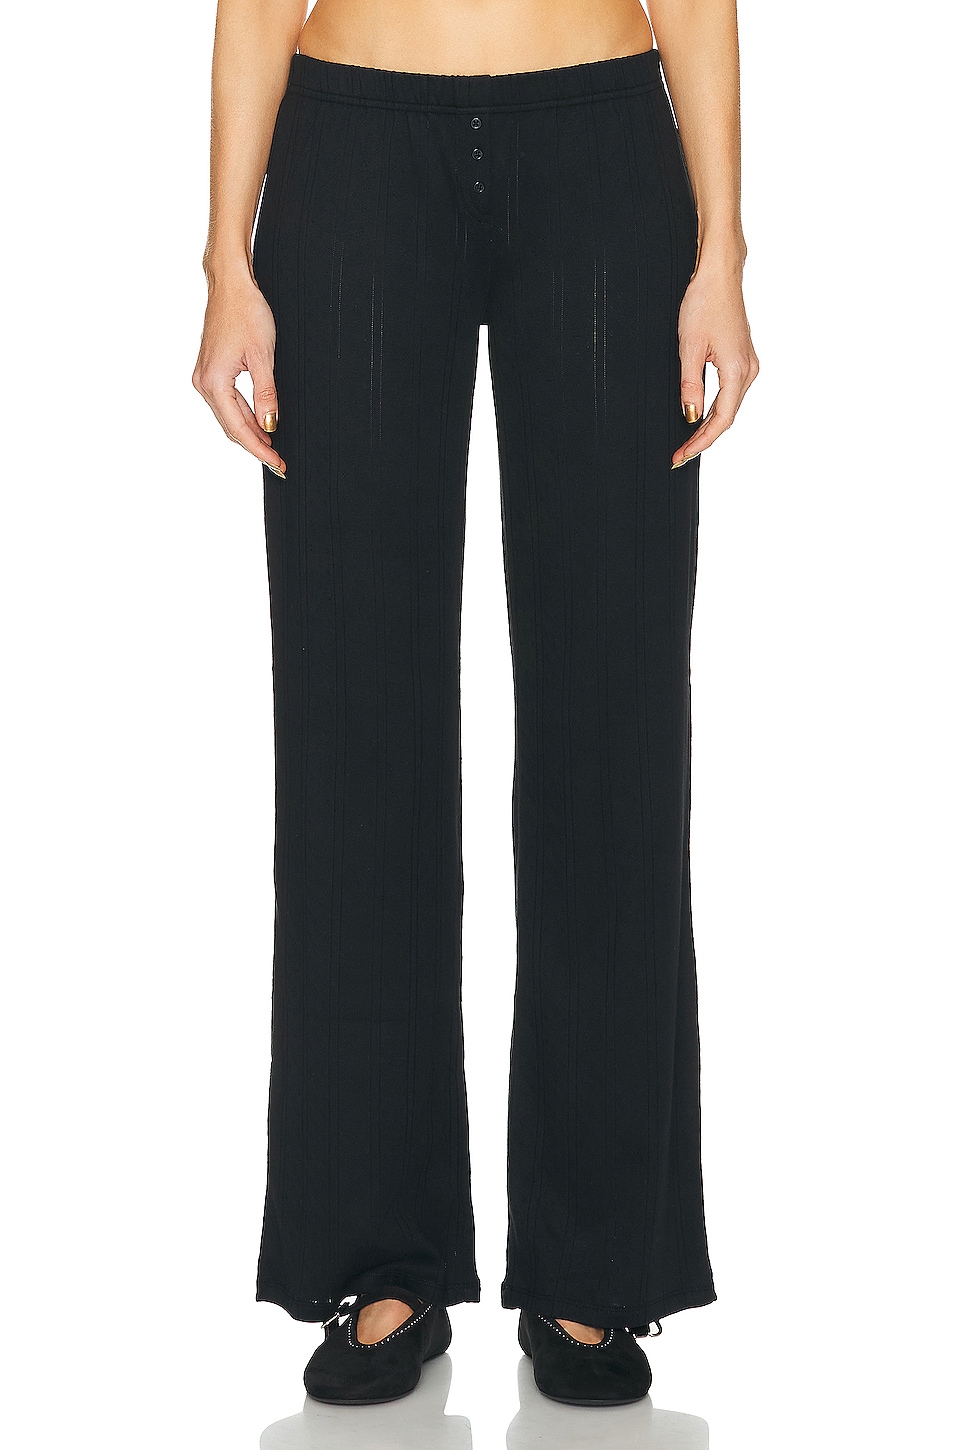 Image 1 of Cou Cou Intimates The Pant in Black